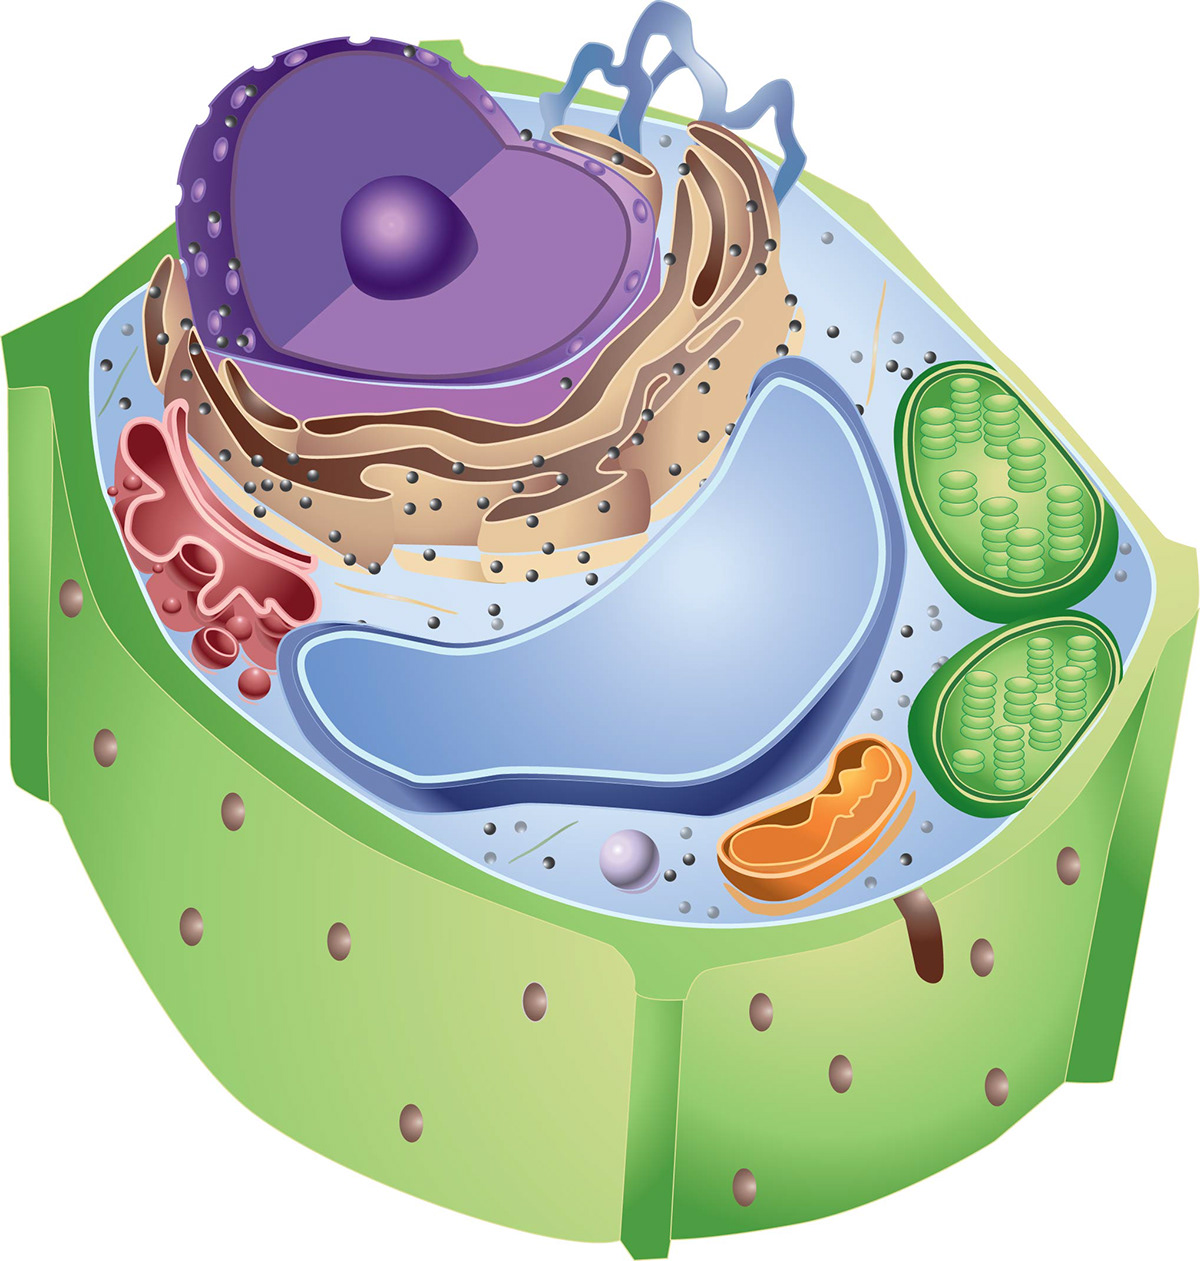 Animalcell plantcell